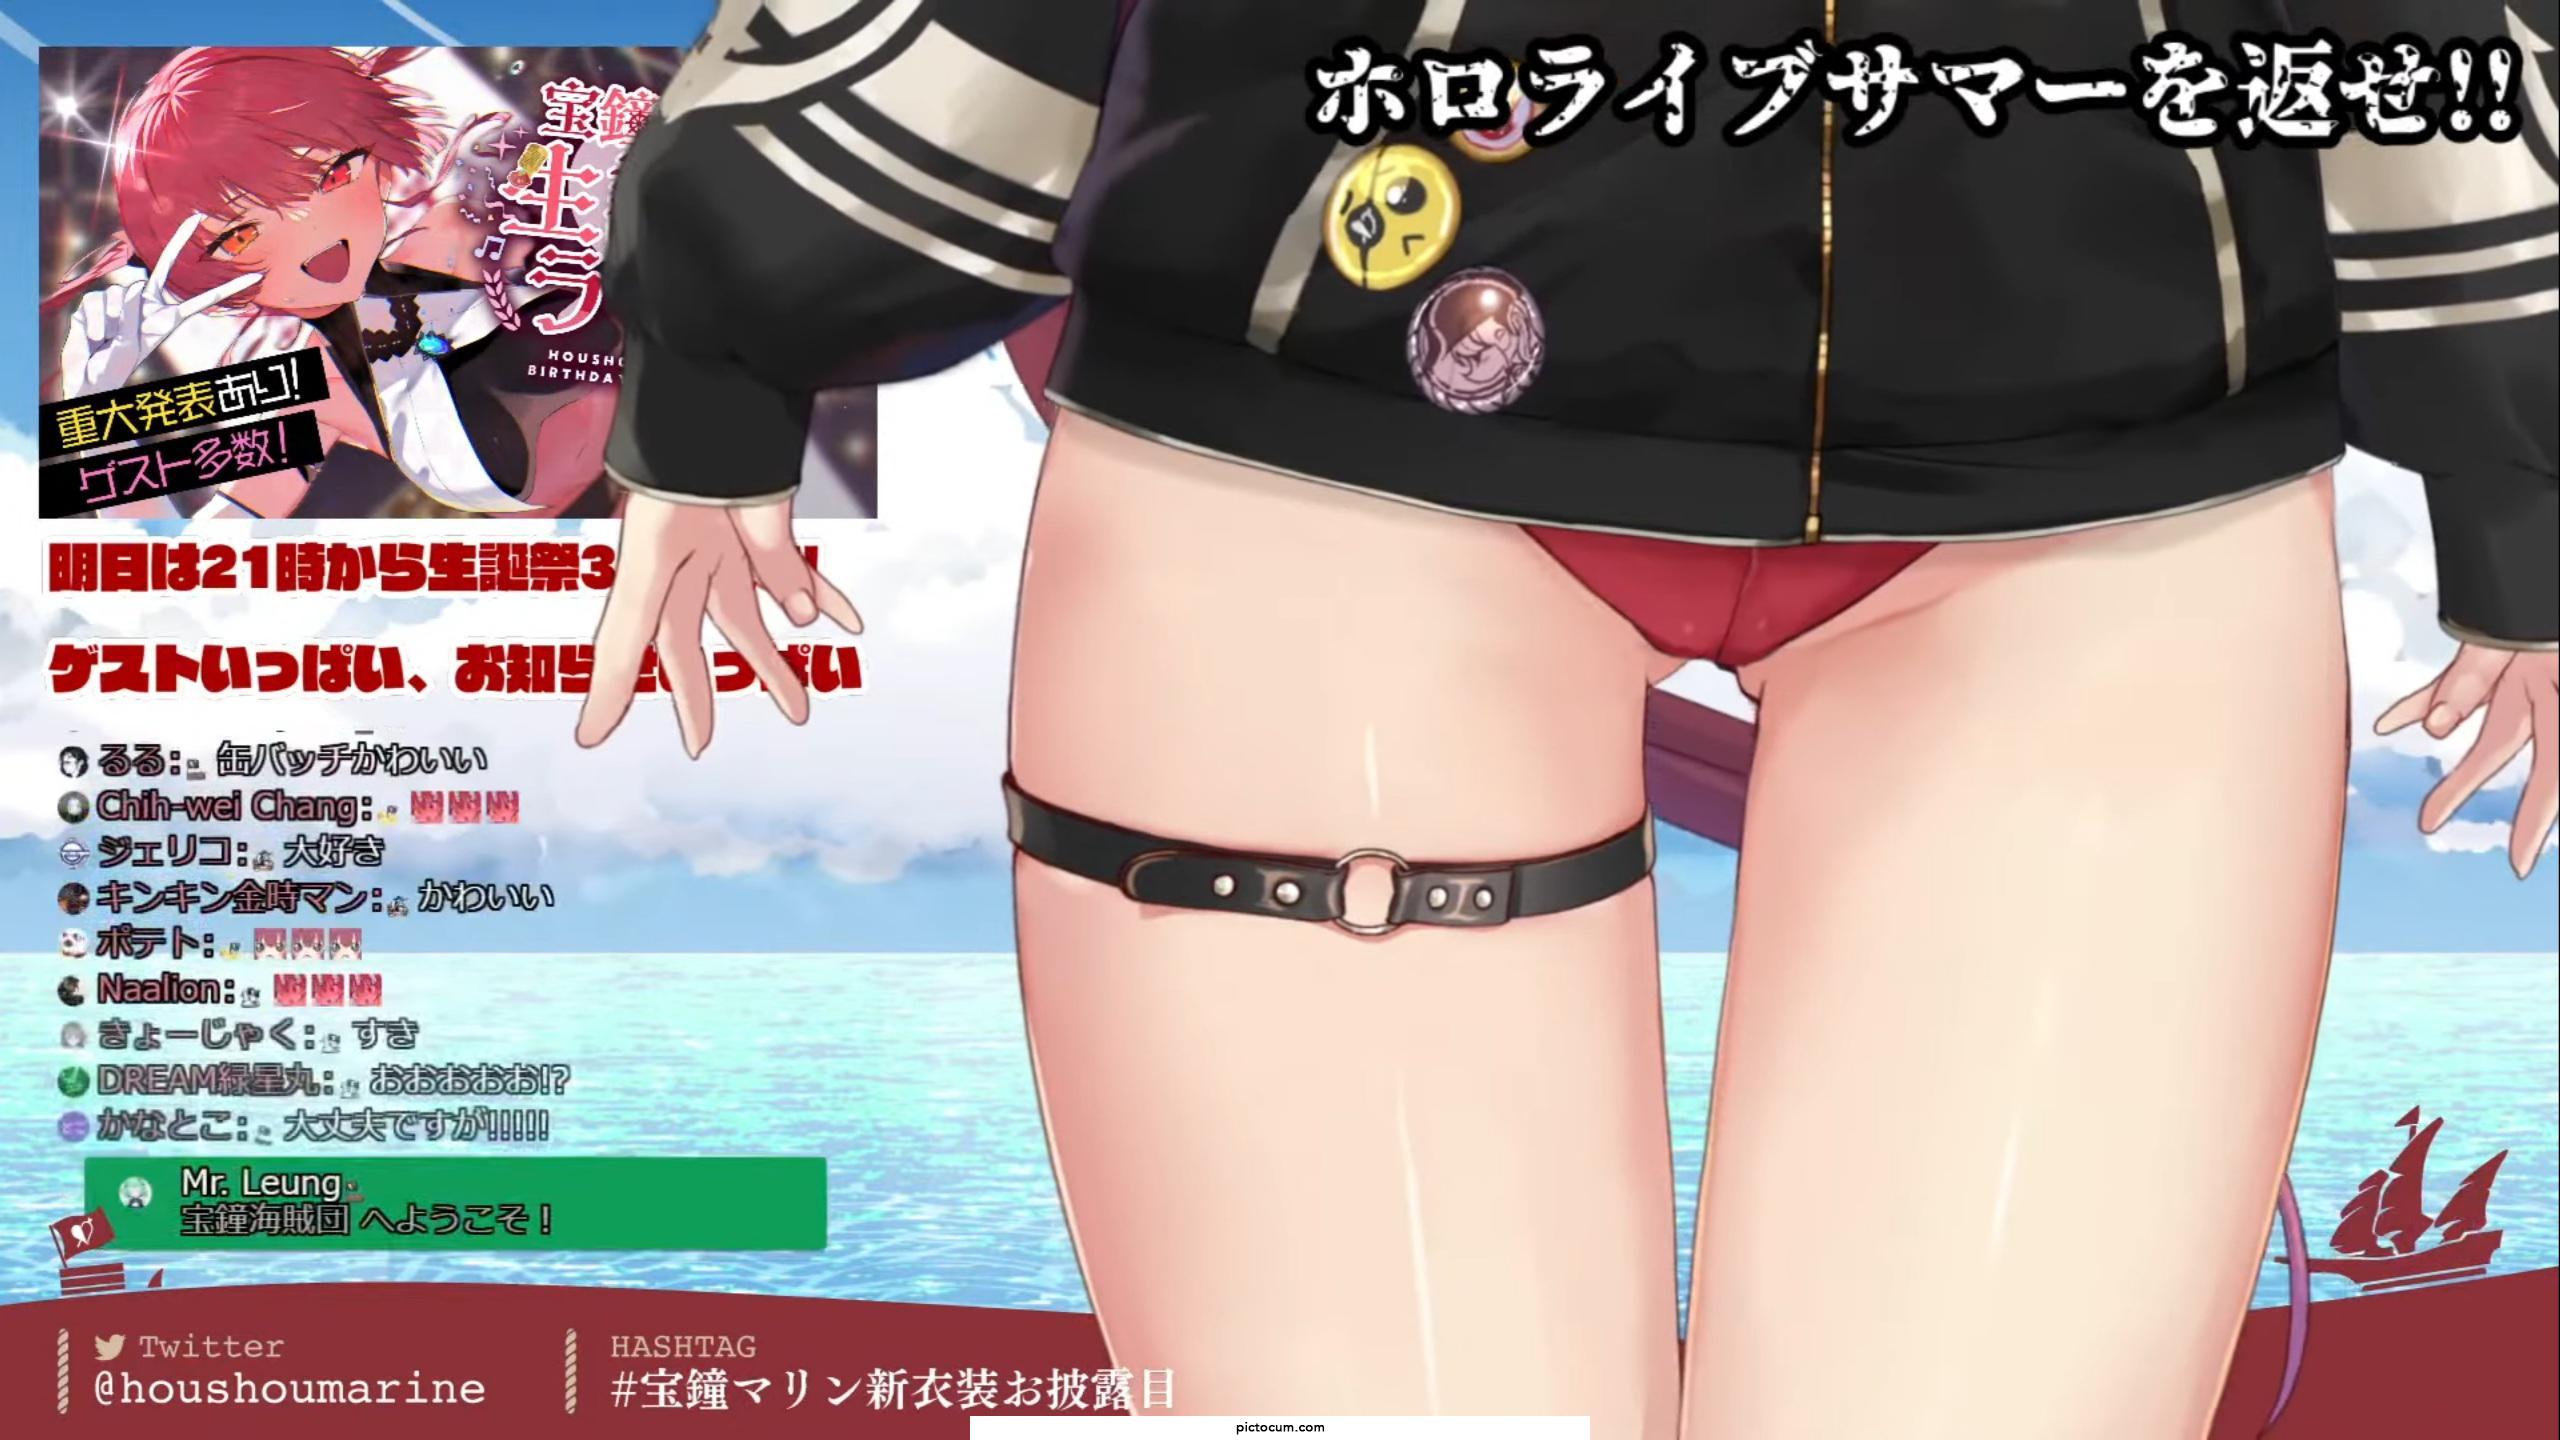 Marine's new outfit has buttfangs when she takes her shorts off [Hololive]